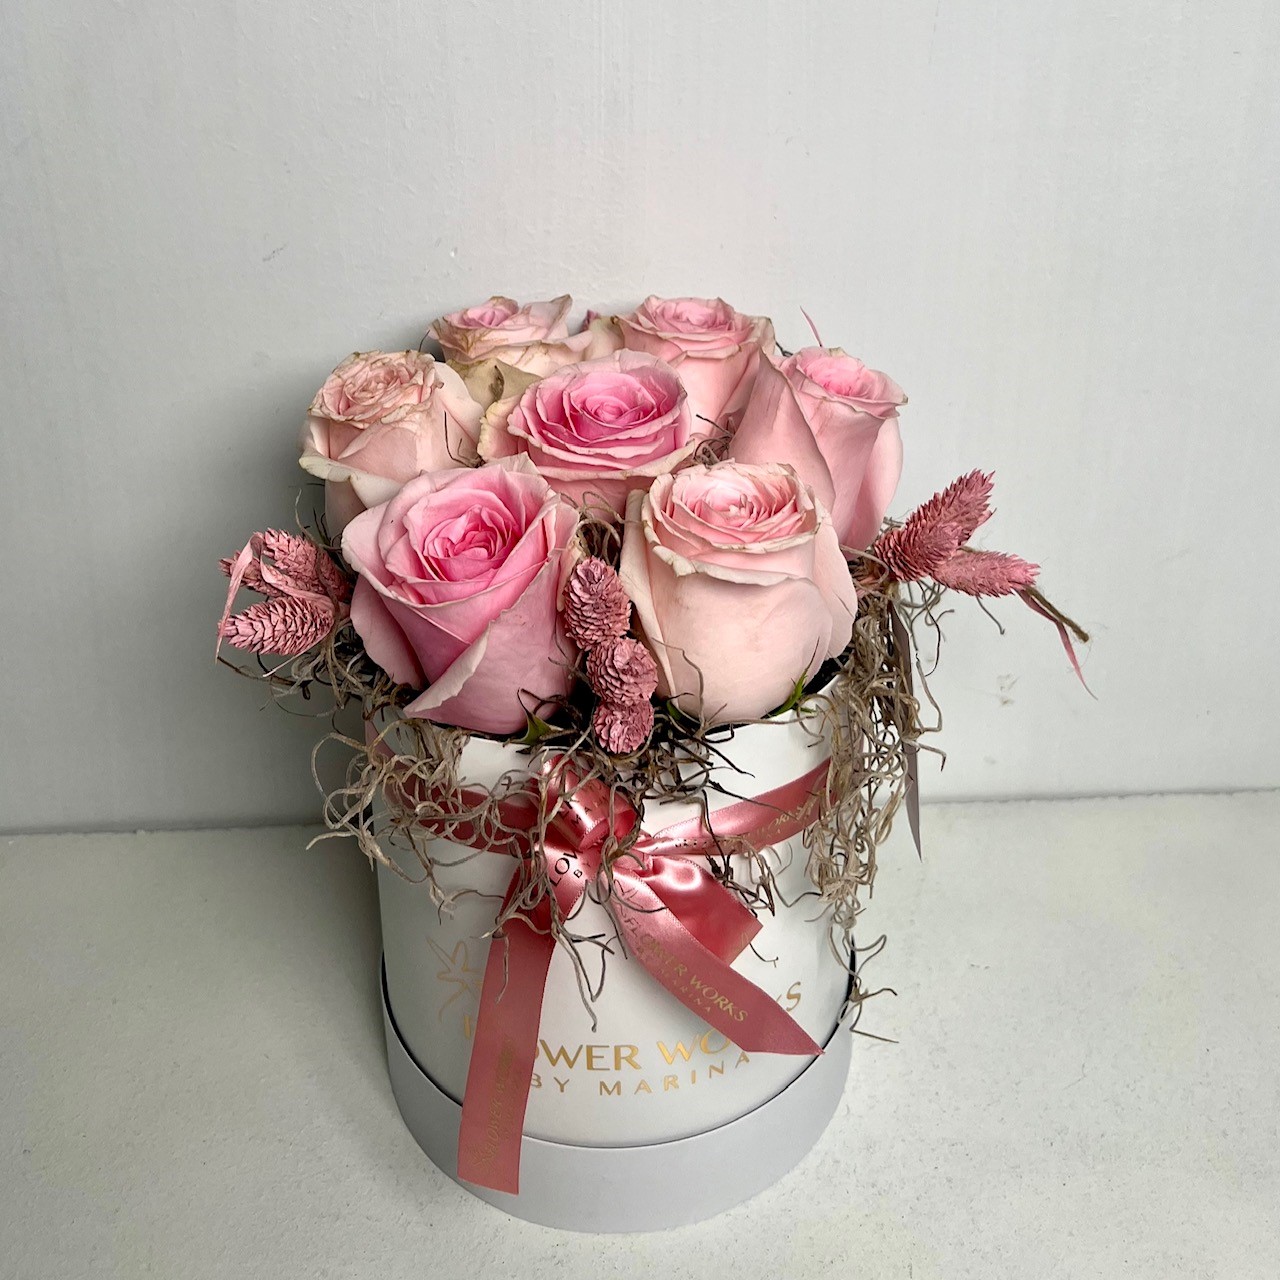 PINK COMBINATION OF ROSES IN A BOX